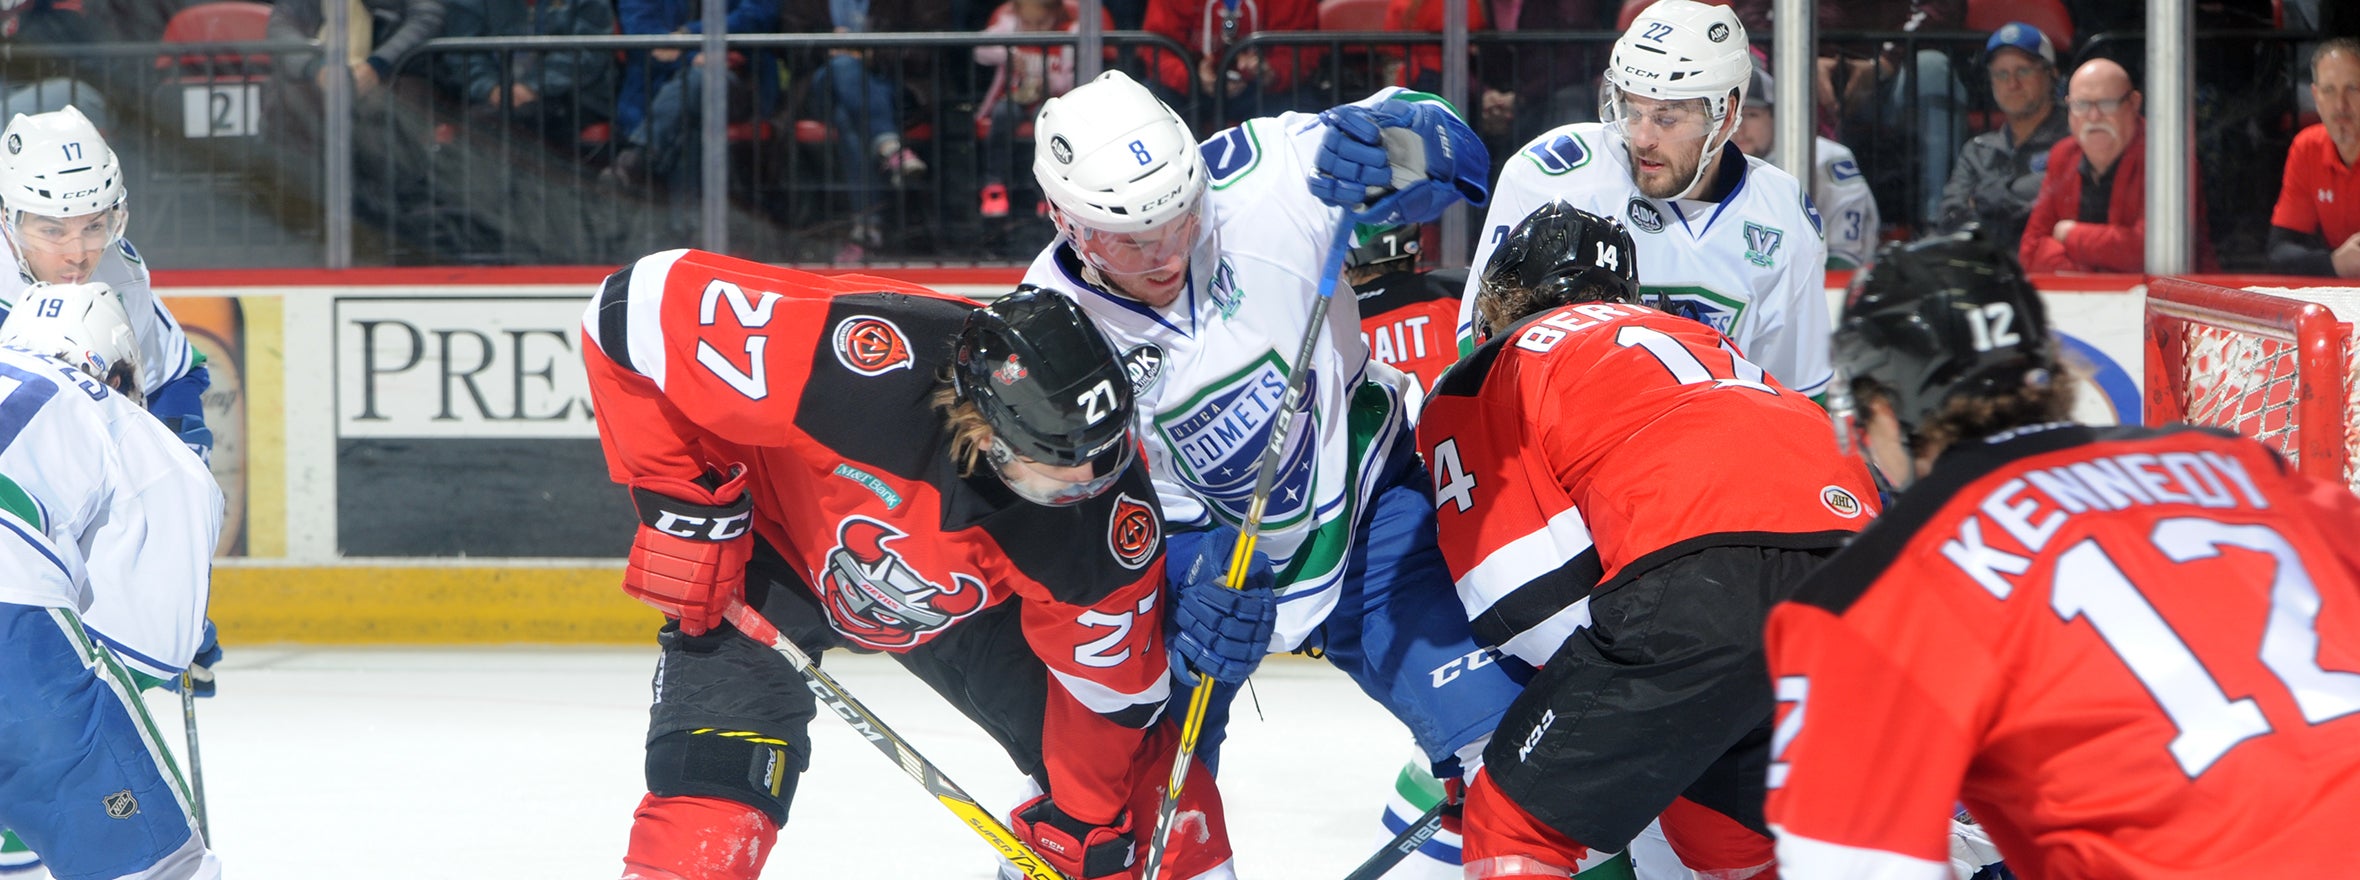 COMETS ROUTED BY DEVILS